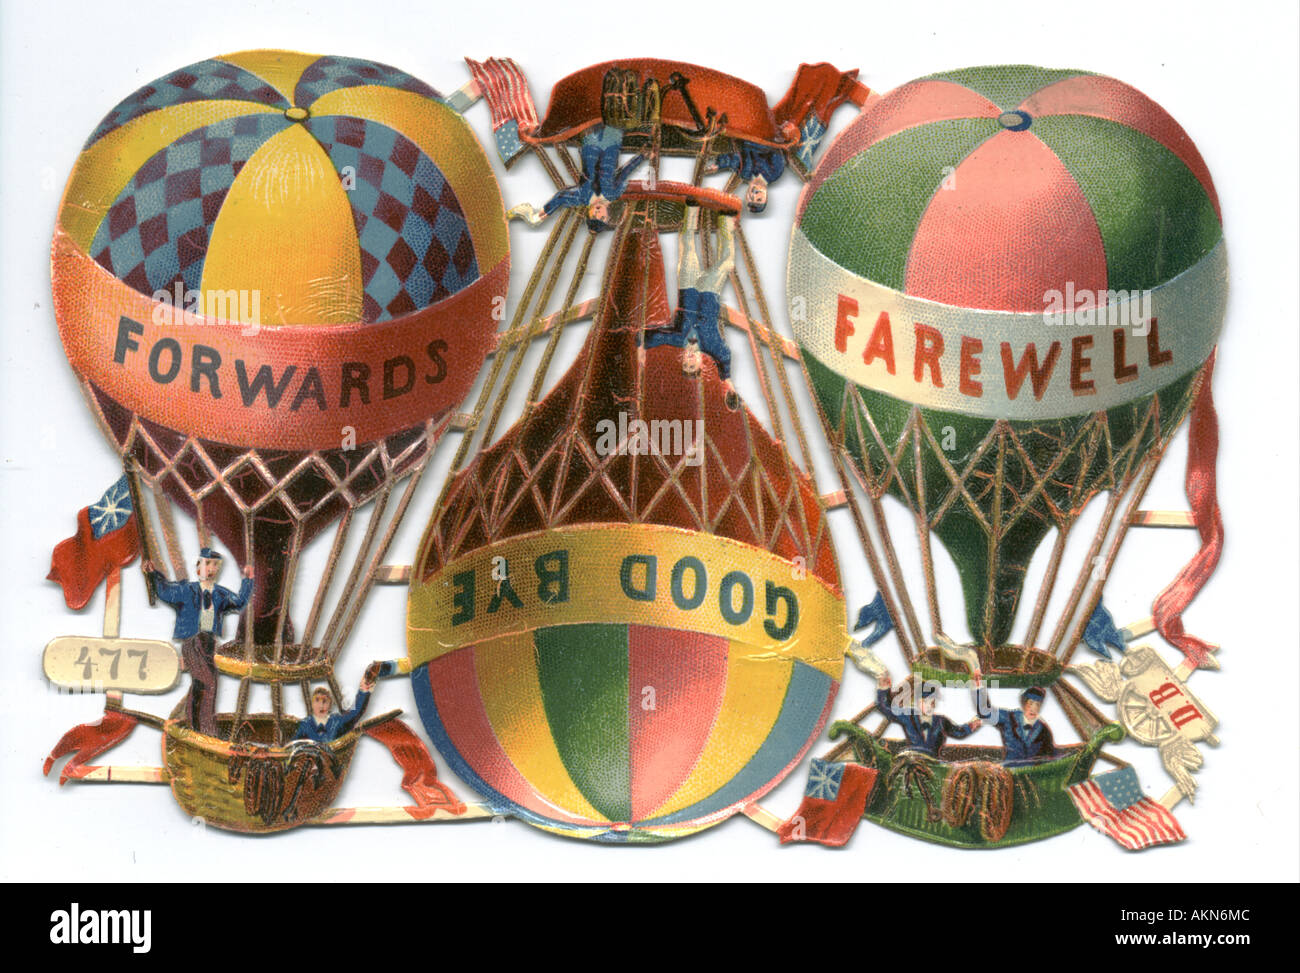 Uncut chromolithographed die cut scraps of balloons circa 1880 Stock Photo